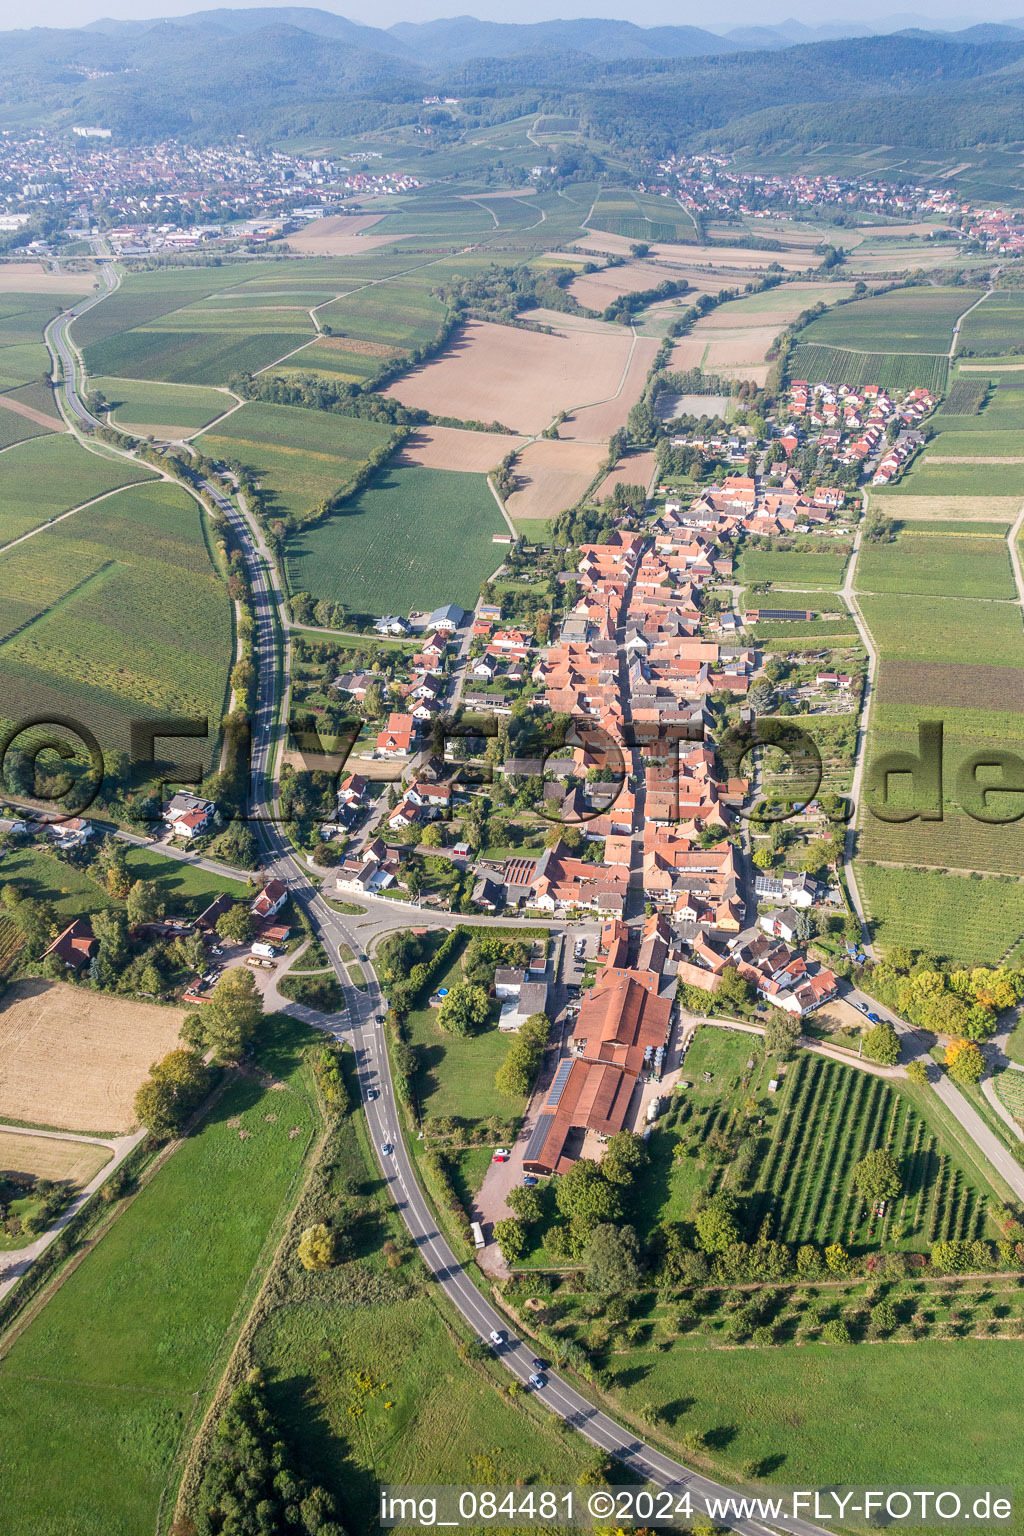 Aerial view of Village - view on the edge of agricultural fields and farmland in Niederhorbach in the state Rhineland-Palatinate, Germany